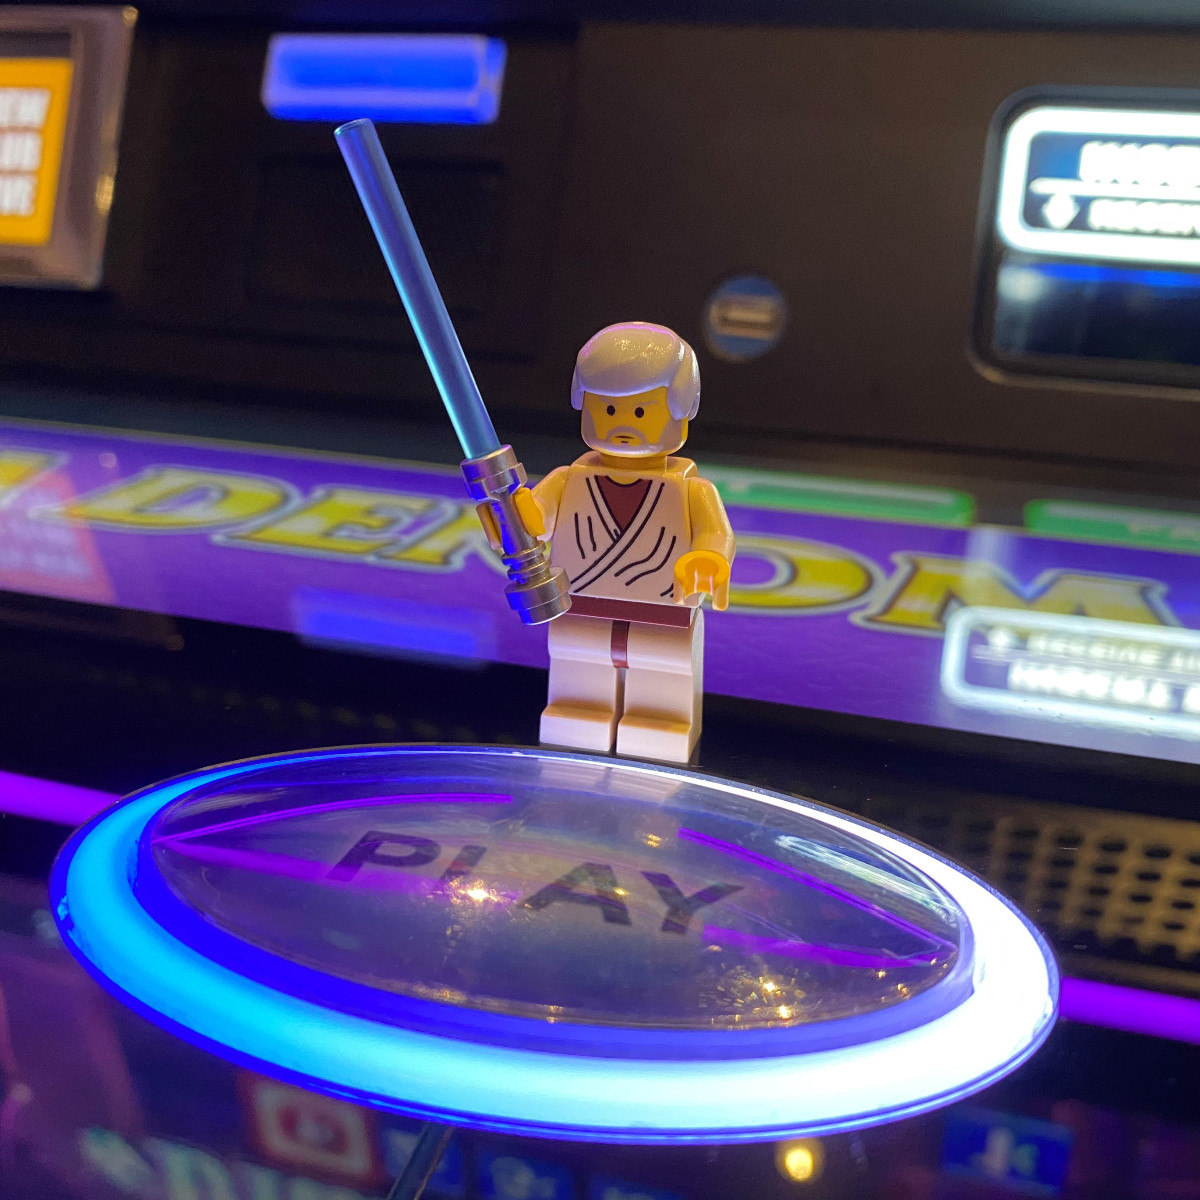 Obi-Wan is out trying his luck as part of #MayThe4th. Let's send some positive vibes his way! #RiversideCasino #EliteCasinoResorts #Iowa